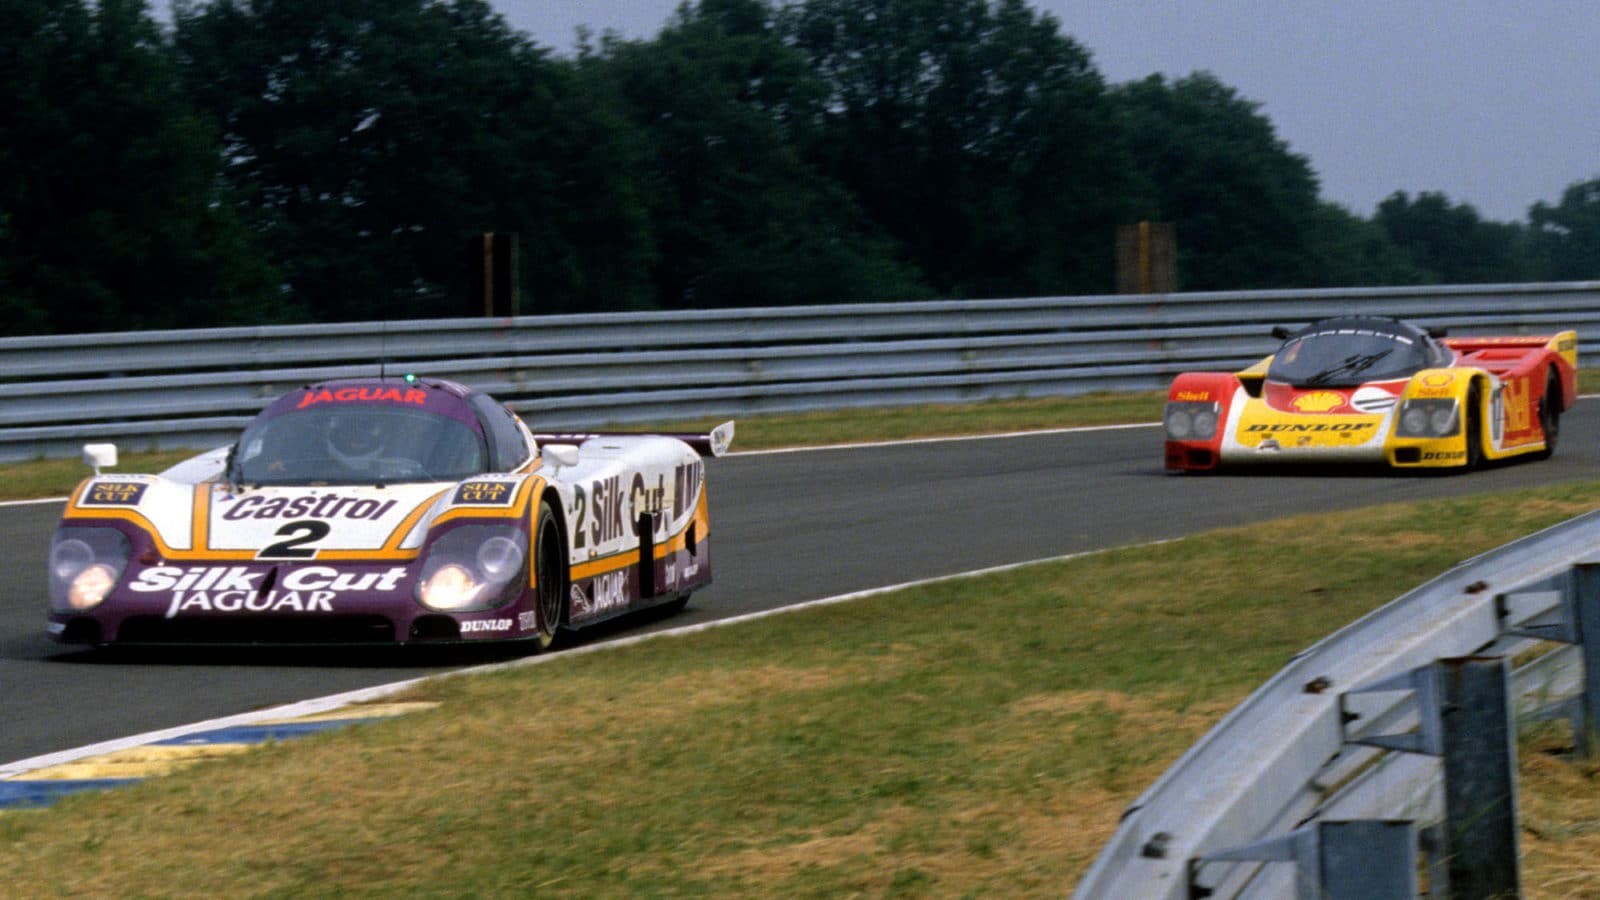 9 LE MANS 24 HOURS 1988 - PHOTO - THIERRY BOVY : DPPI N°2 - JAN LAMMERS (NDL) - ANDY WALLACE (GBR) - JOHNNY DUMFRIES (GBR) : JAGUAR XJR 9 LM SILK CUT